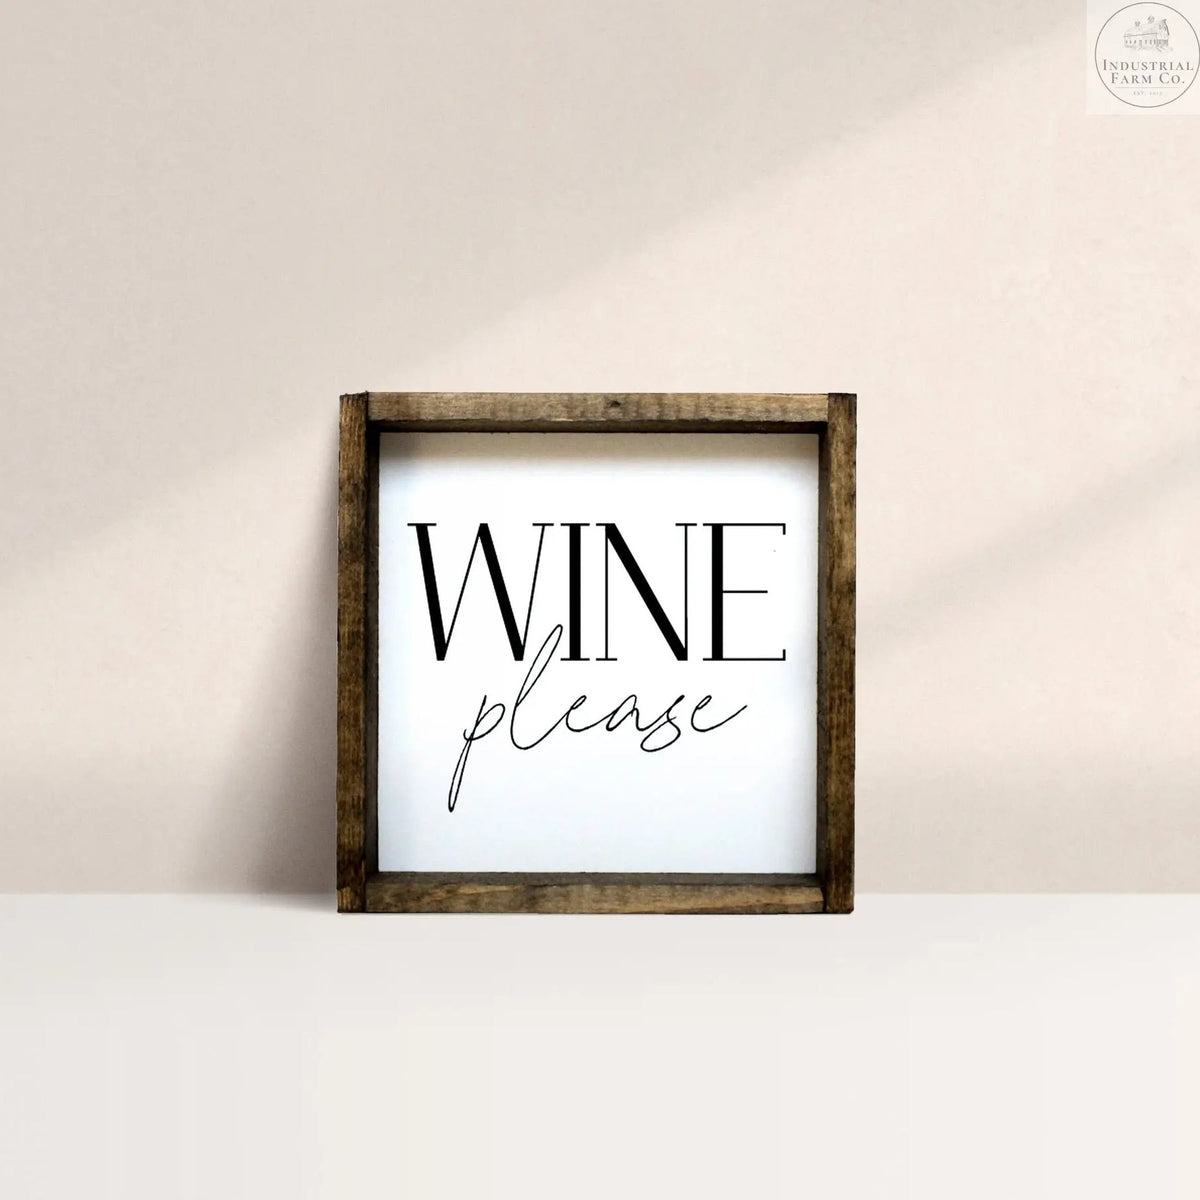 &quot;Wine Please&quot; Wood Sign Home Wall Sign Default Title   | Industrial Farm Co